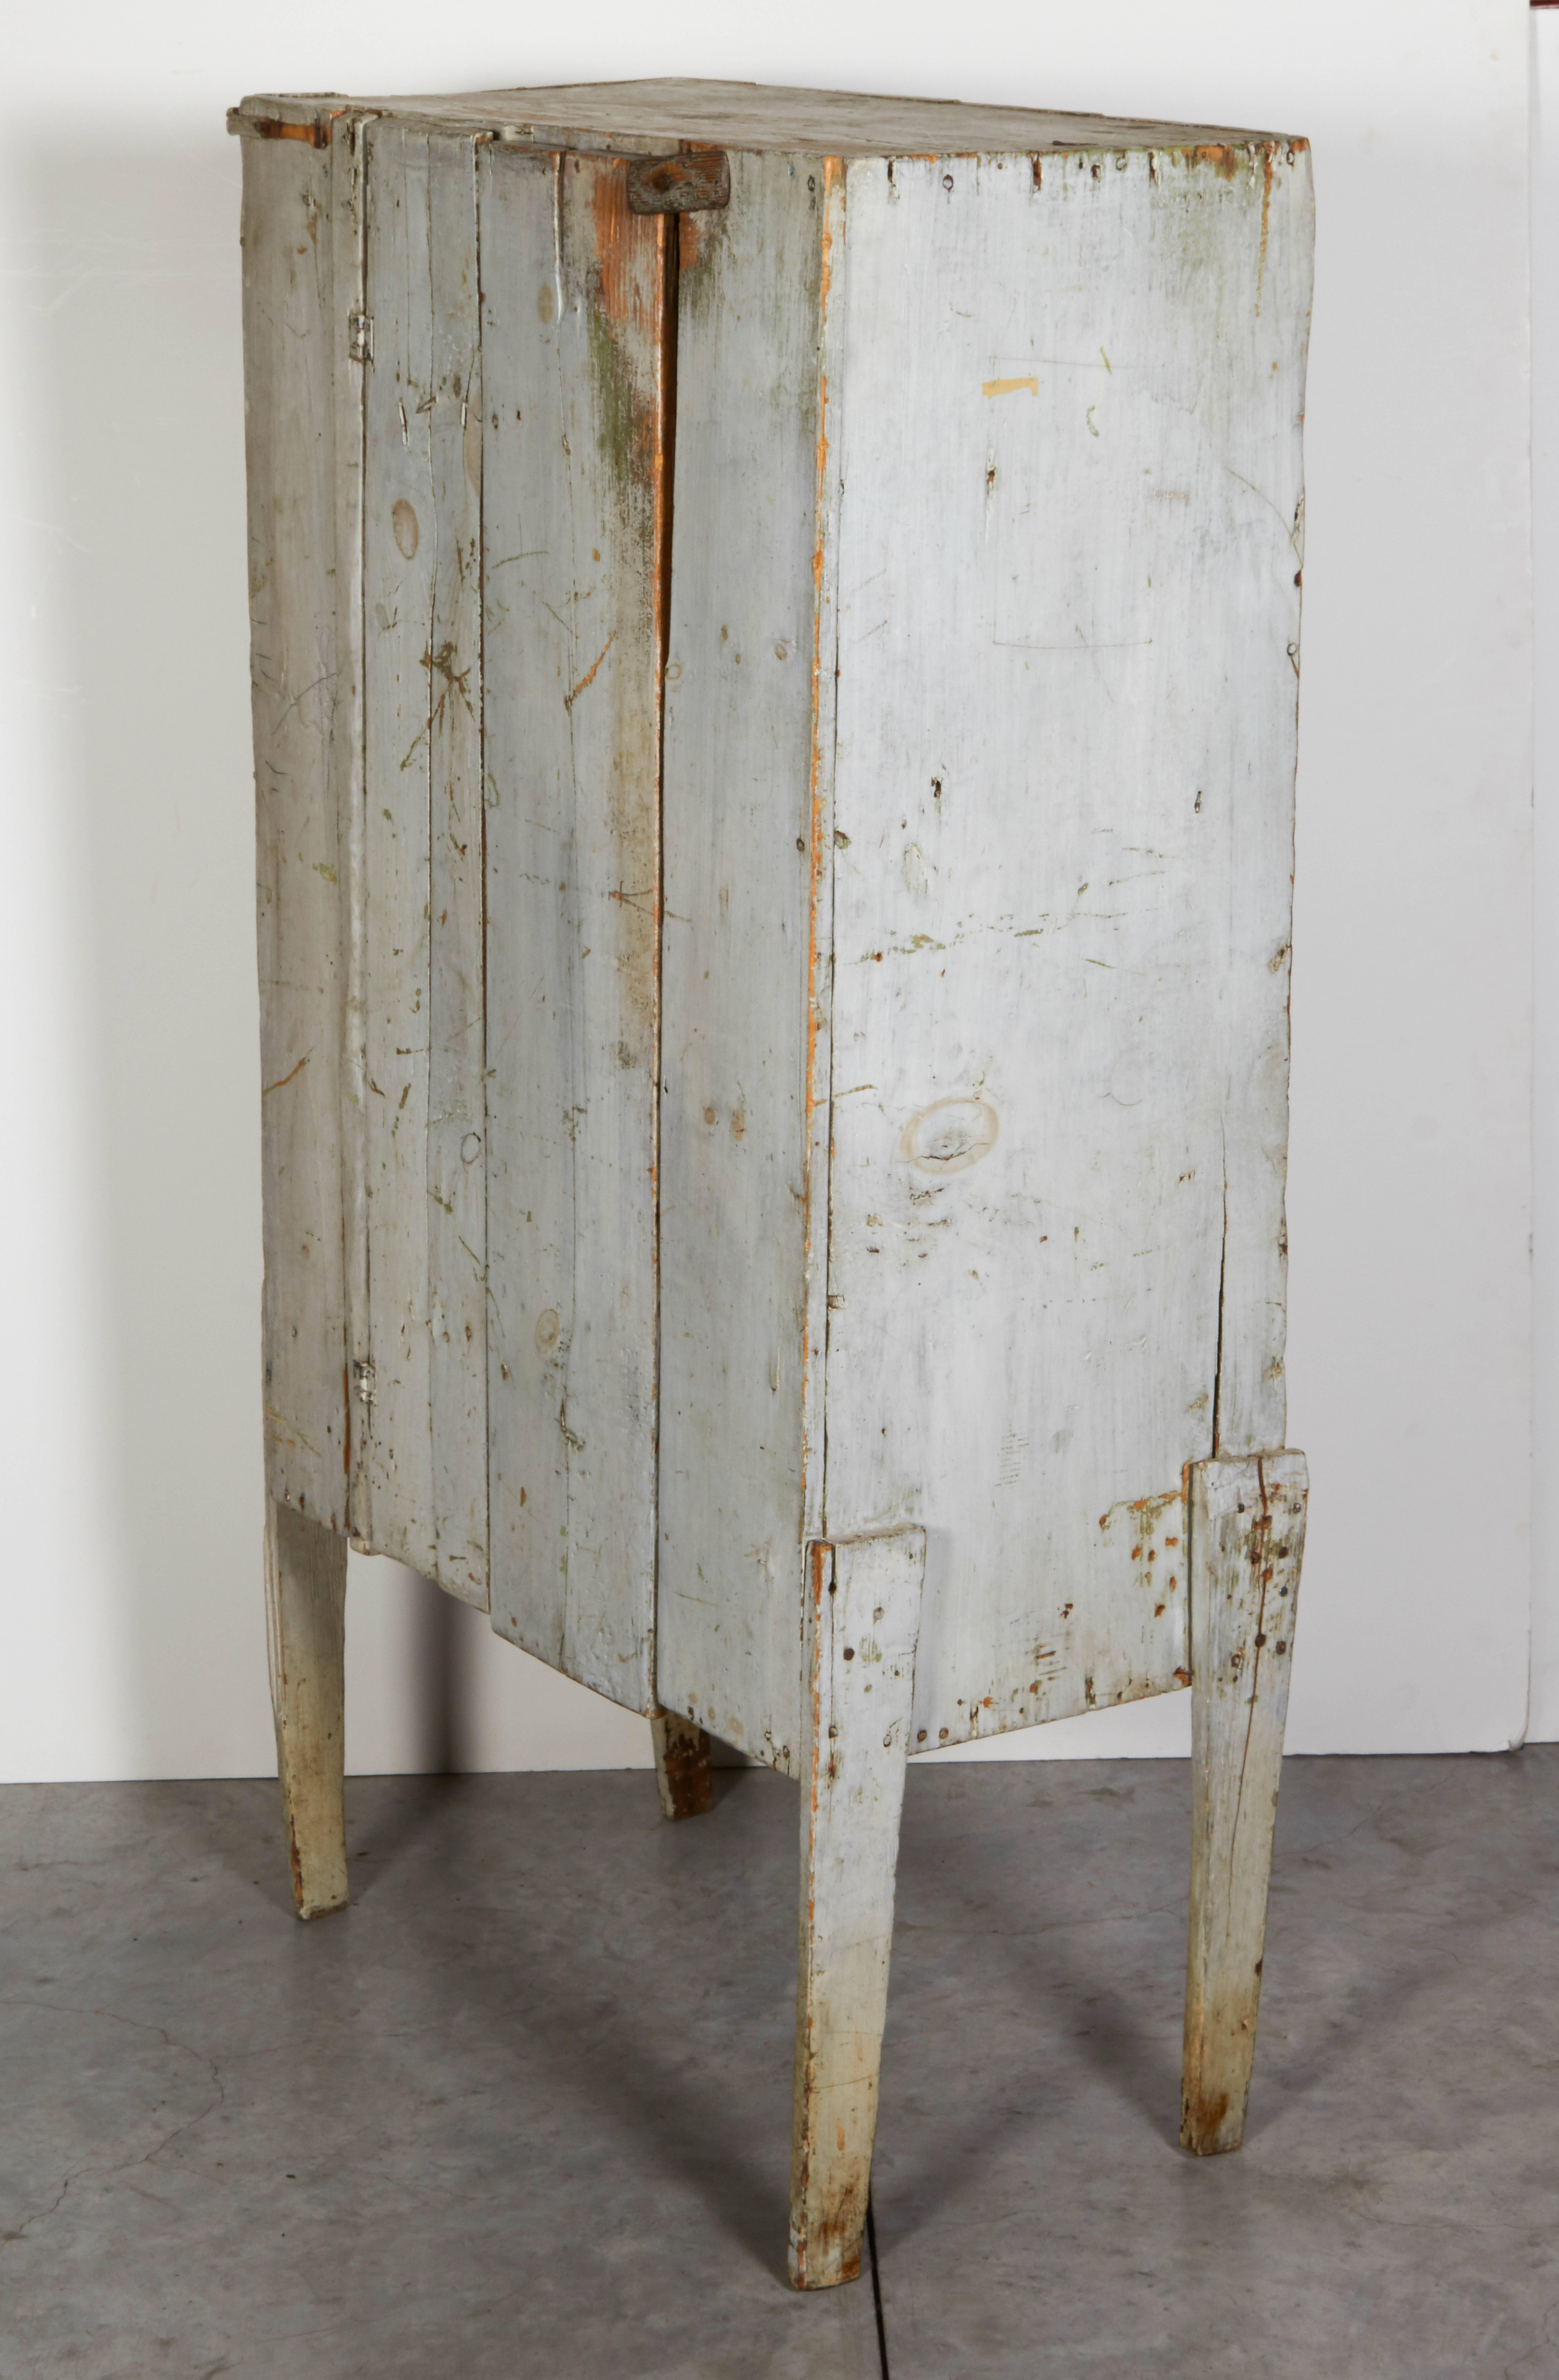 An unusual and striking American cabinet standing on four legs and constructed with uneven planks of wood. This cabinet has it's original, beautifully faded paint. Truly a one of a kind country piece.
C543.